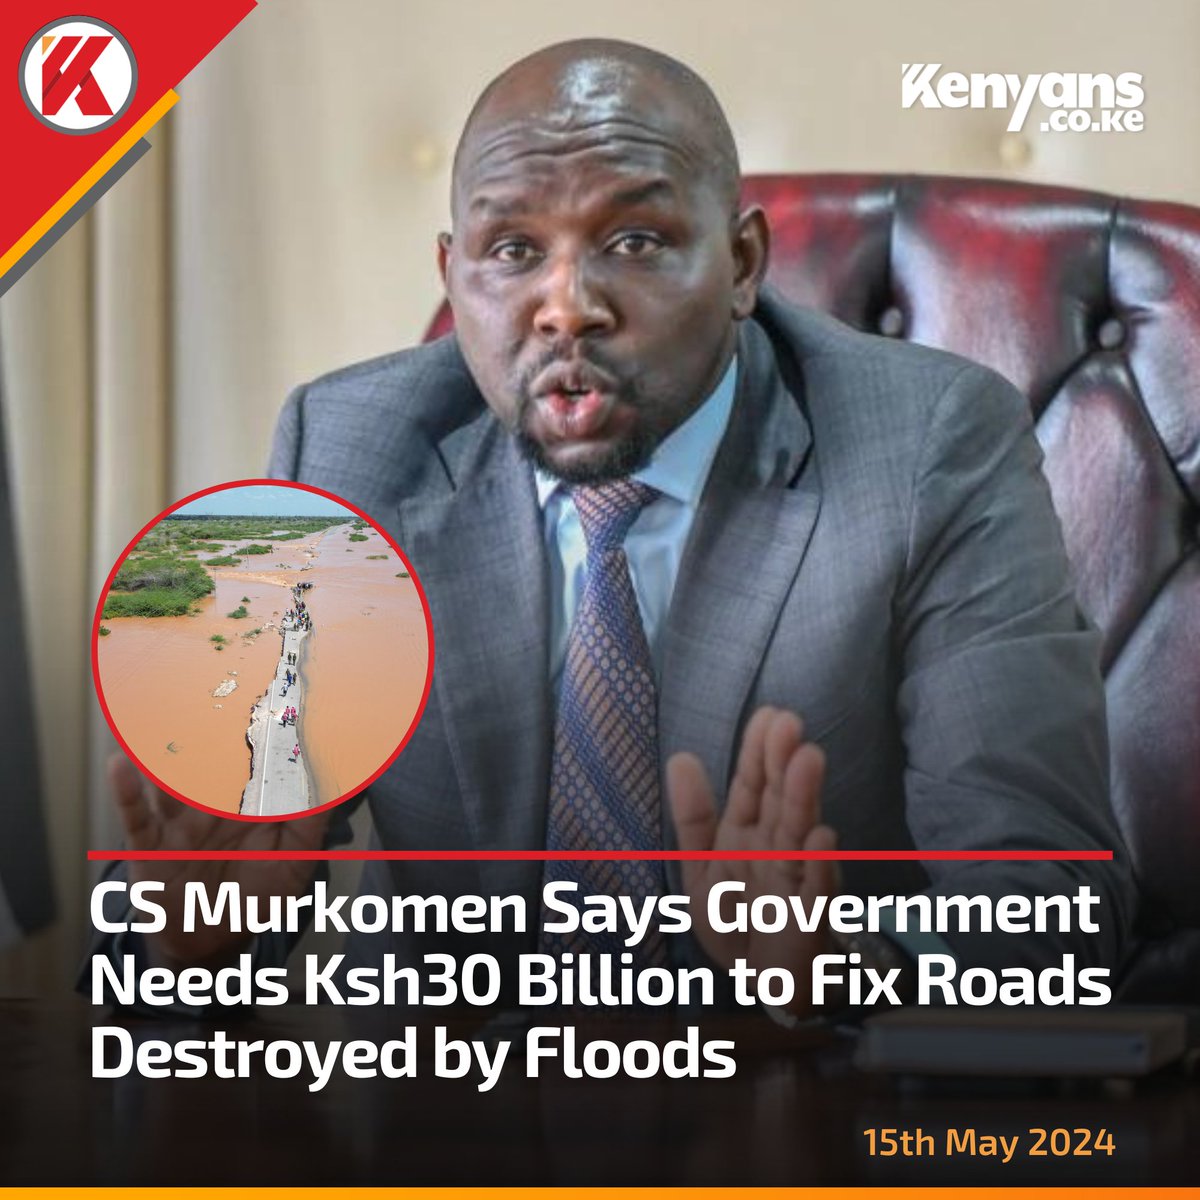 CS Murkomen says government needs Ksh30 billion to fix roads destroyed by floods